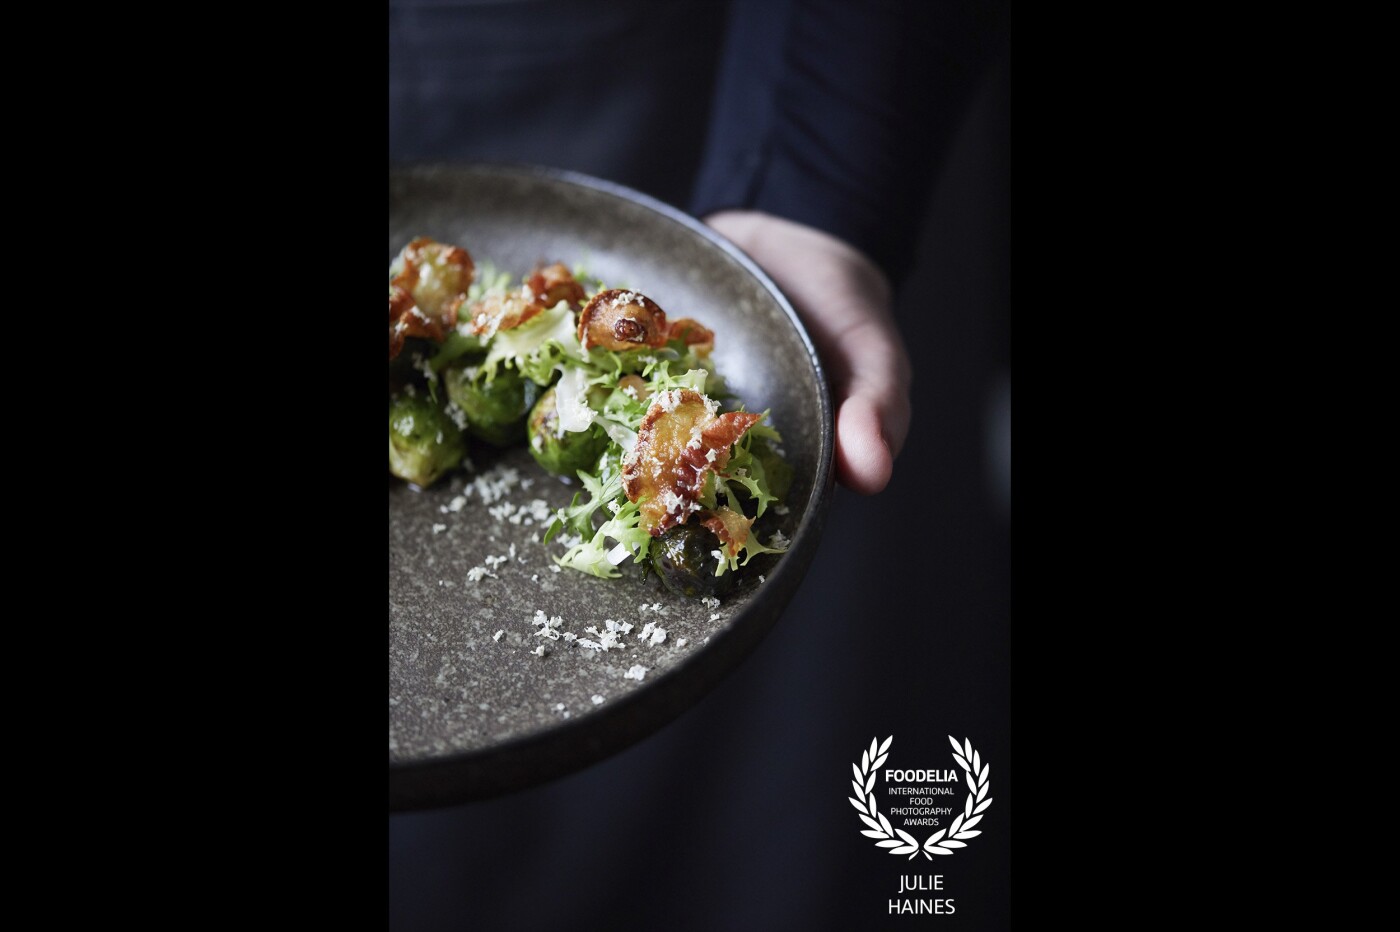 Photo shot for awarded regional Victorian restaurant 'Masons of Bendigo' (Australia) - 'Caramelised Brussels sprouts, chestnuts, guanciale and fresh horseradish.' Being a country girl myself, I love seeing regional restaurants using fresh local produce and celebrating old fashioned, wholesome foods like Brussels sprouts.